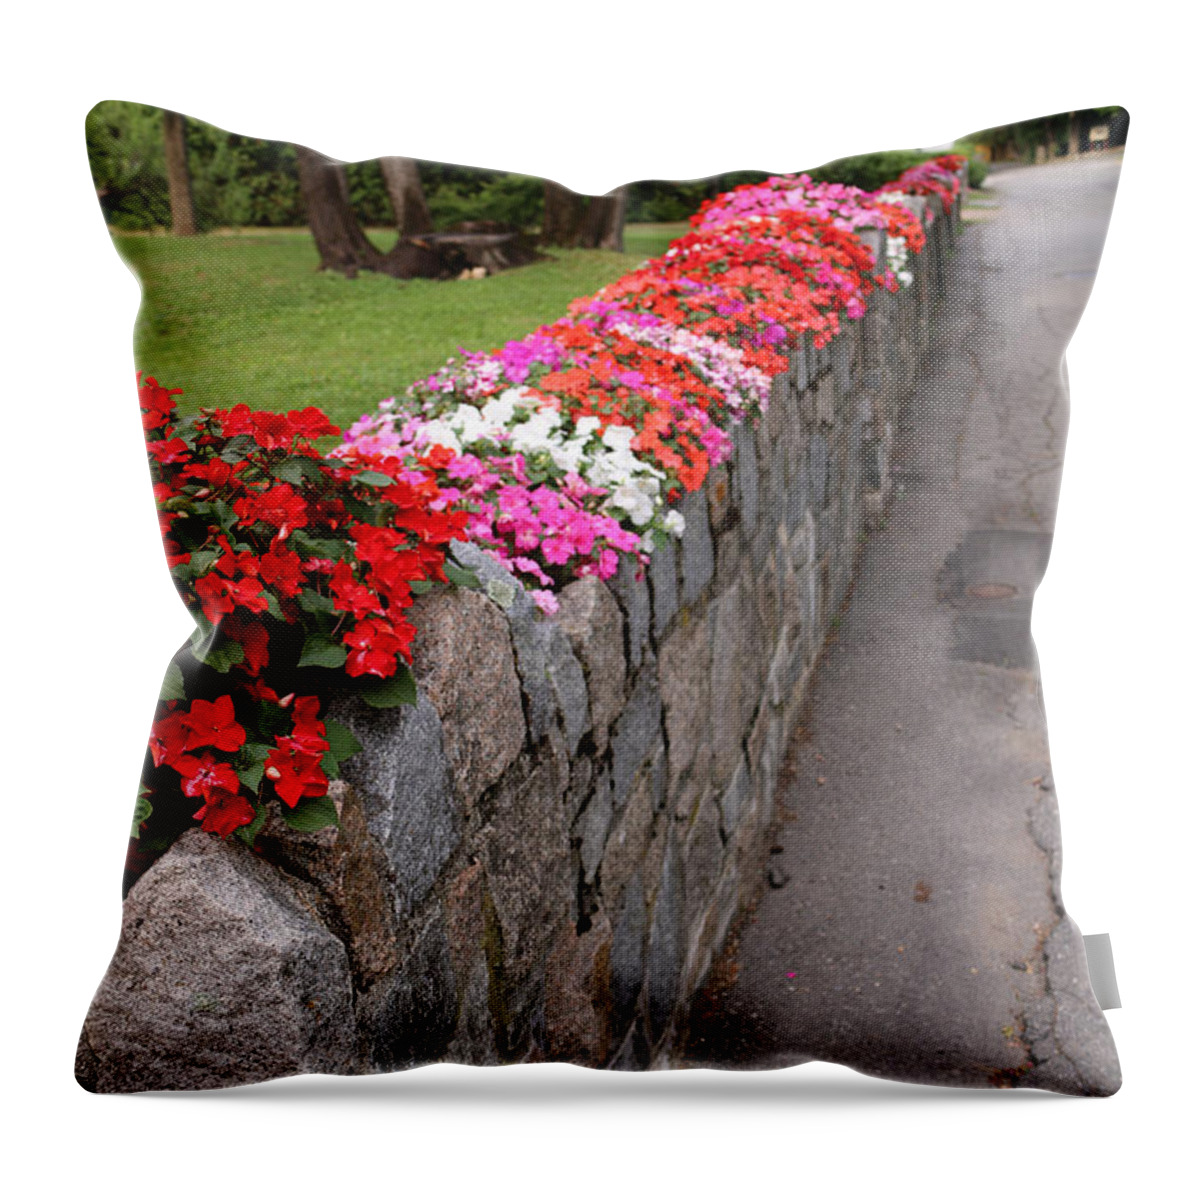 Stone Wall Throw Pillow featuring the photograph Natural Floral Wall 4 by Living Color Photography Lorraine Lynch